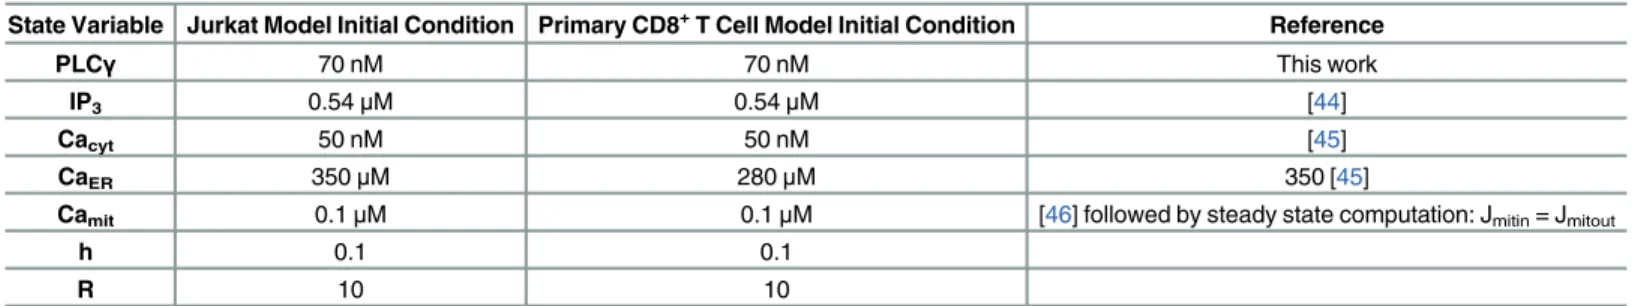 Table 1. Initial conditions for Jurkat Model and Primary CD8 + T Cell Models.